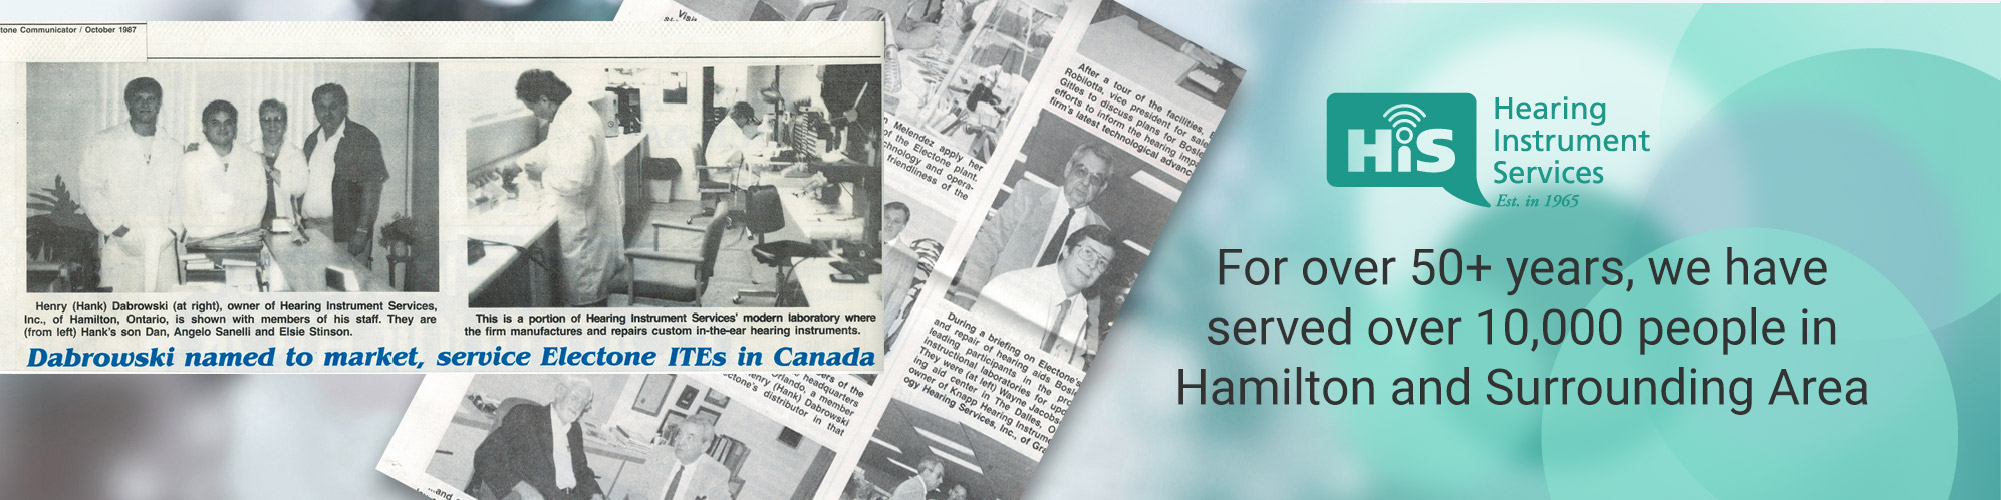 For over 50+ years, we have served over 10,000 people in Hamilton and Surrounding Area